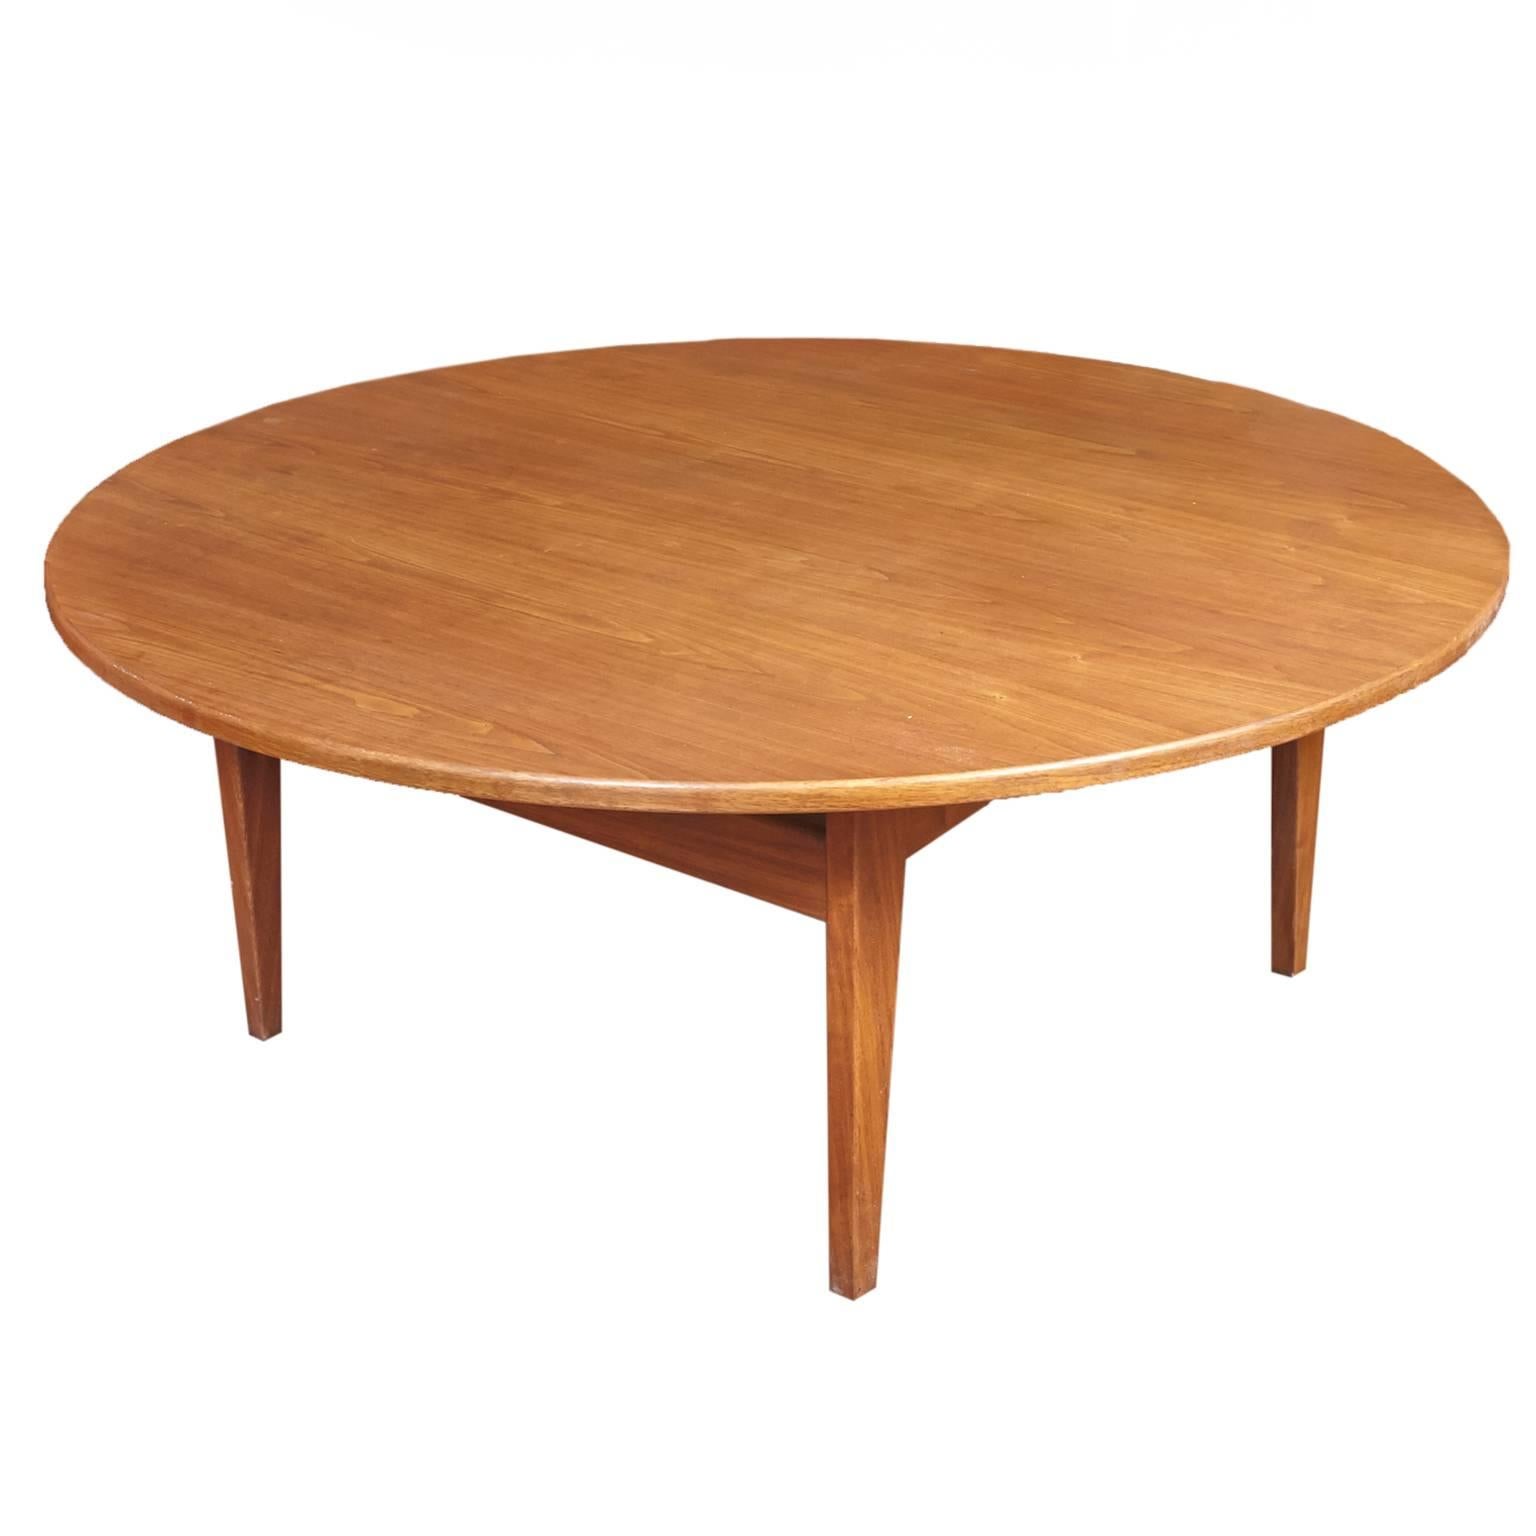 Beautifully designed Jens Risom floating coffee Table. Round top with square sculptural Base. Original Jens Risom Design Inc. label on bottom.
 